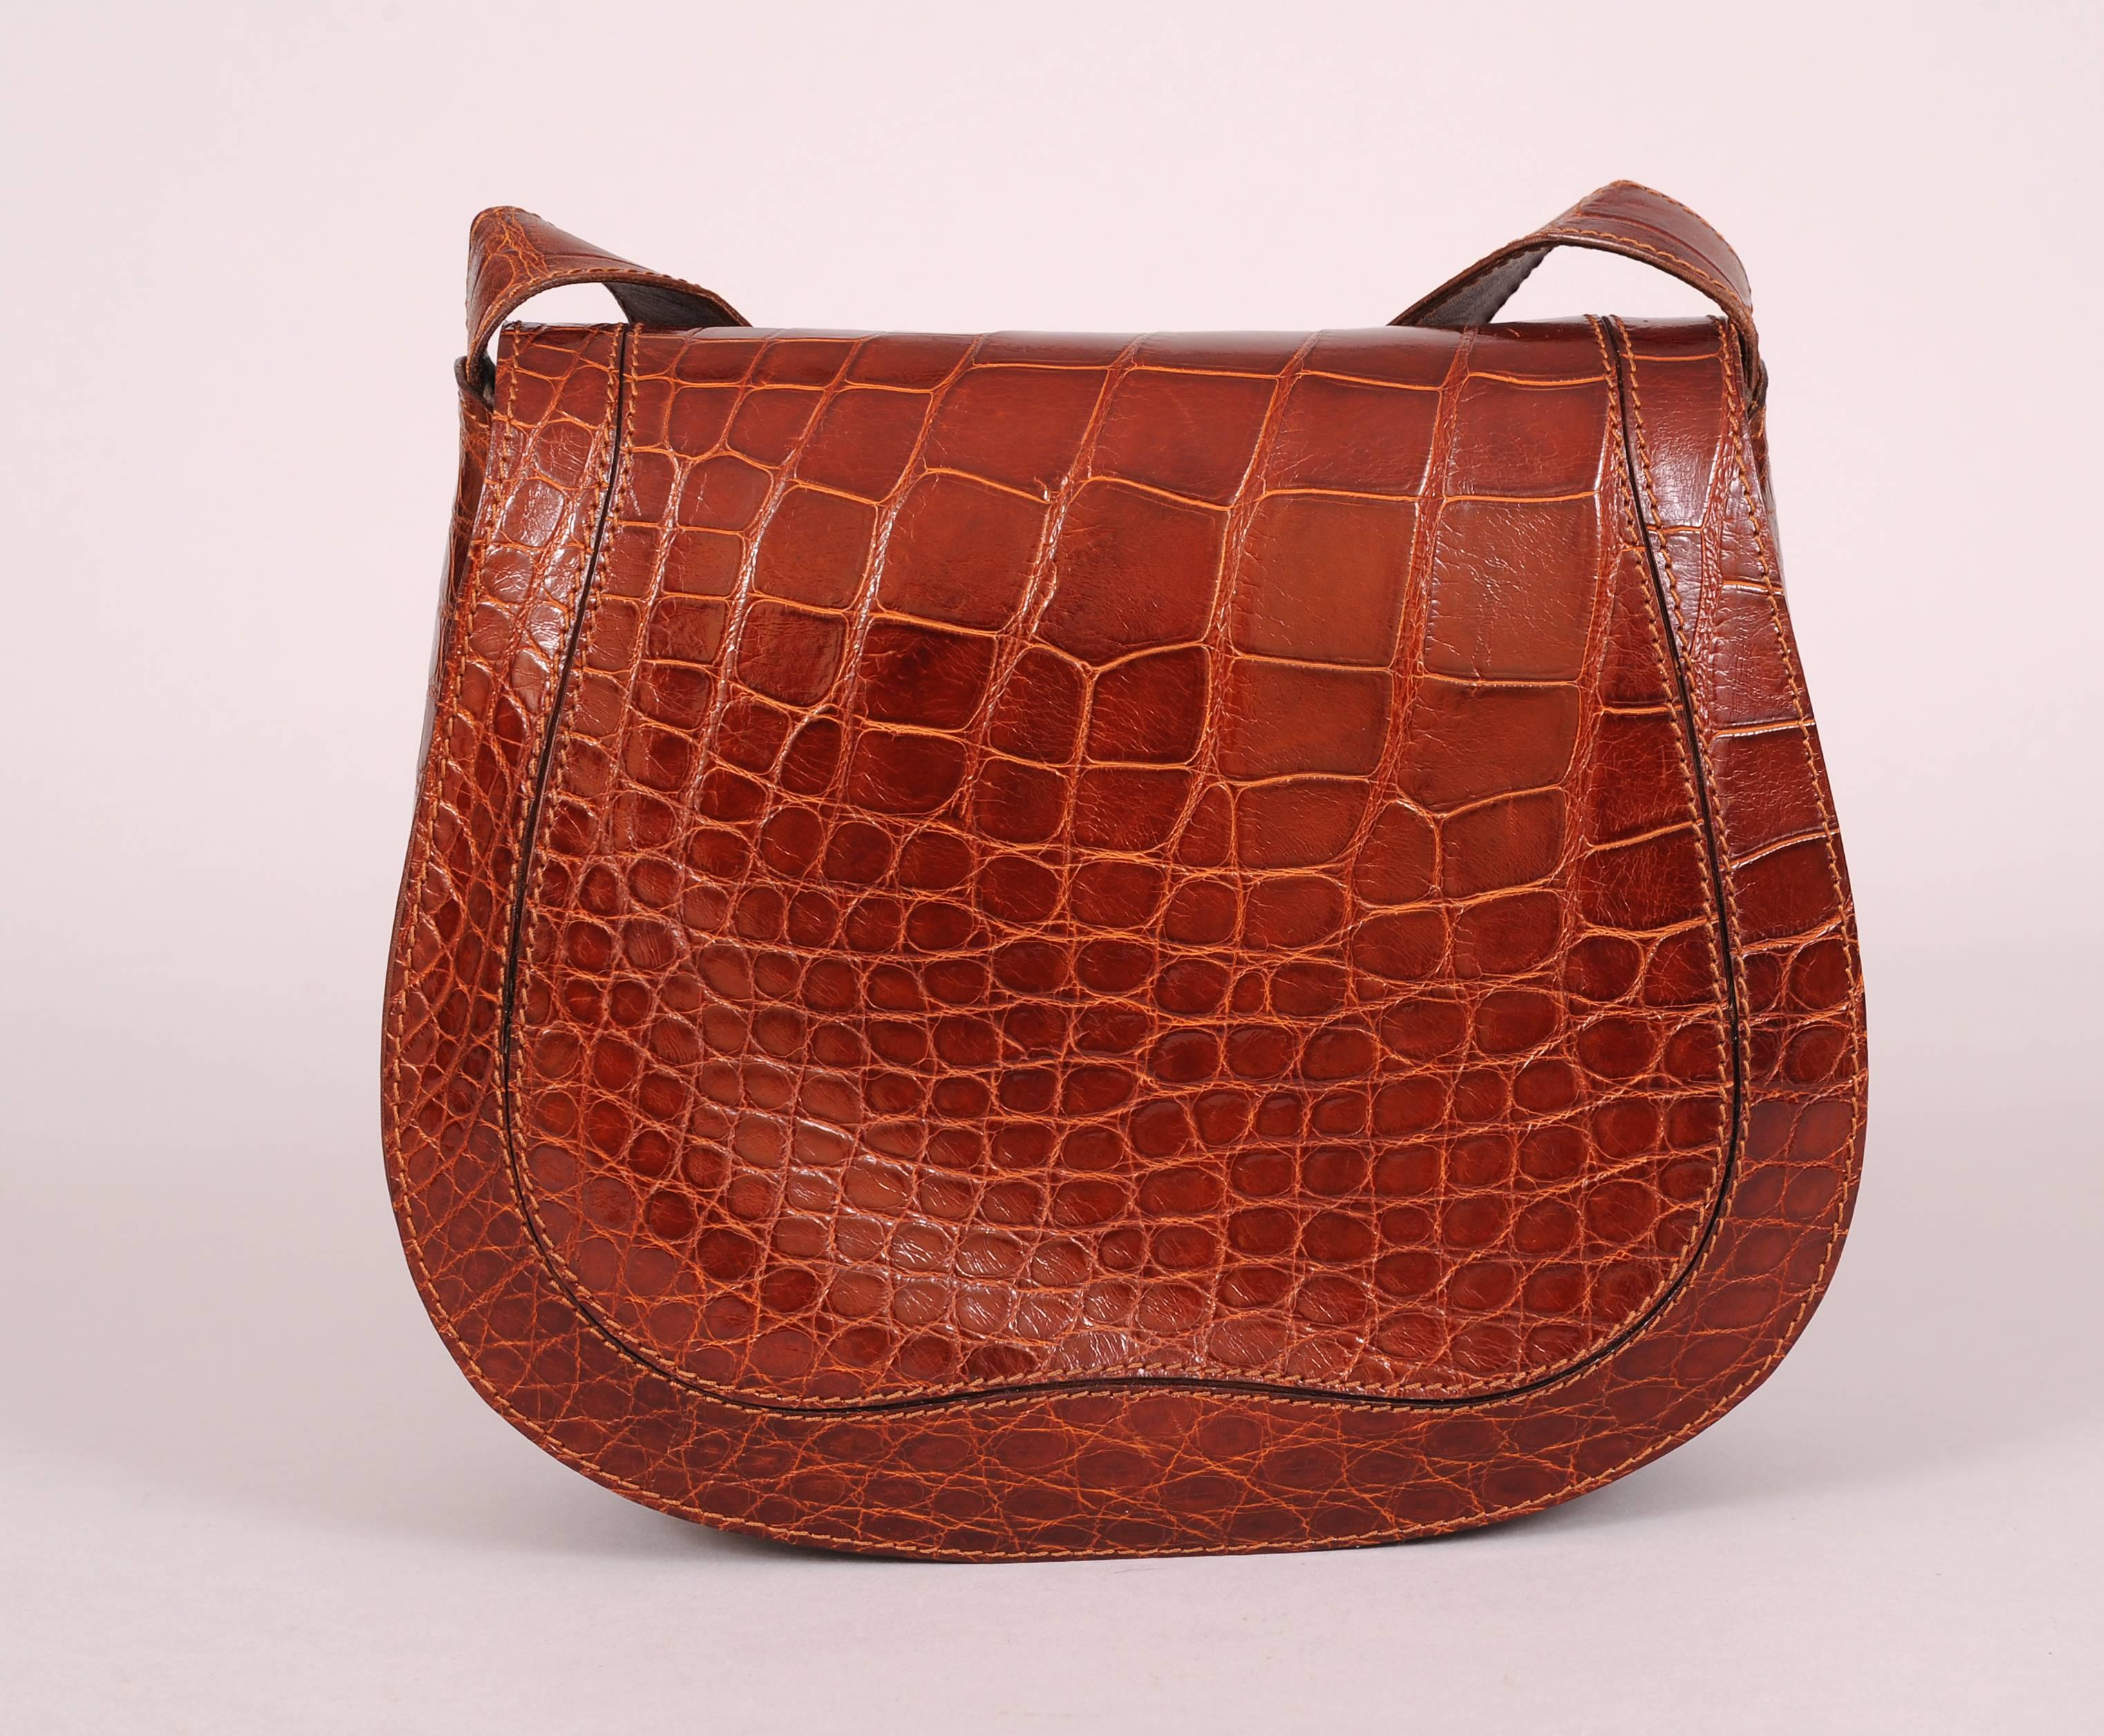 Designed by Hamilton Hodge who has also designed for Bottega Veneta, Ferragamo and  Donna Karan this deVecchi genuine alligator bag is in pristine condition and looks as if it was never used. The front flap is double stitched all around to create a